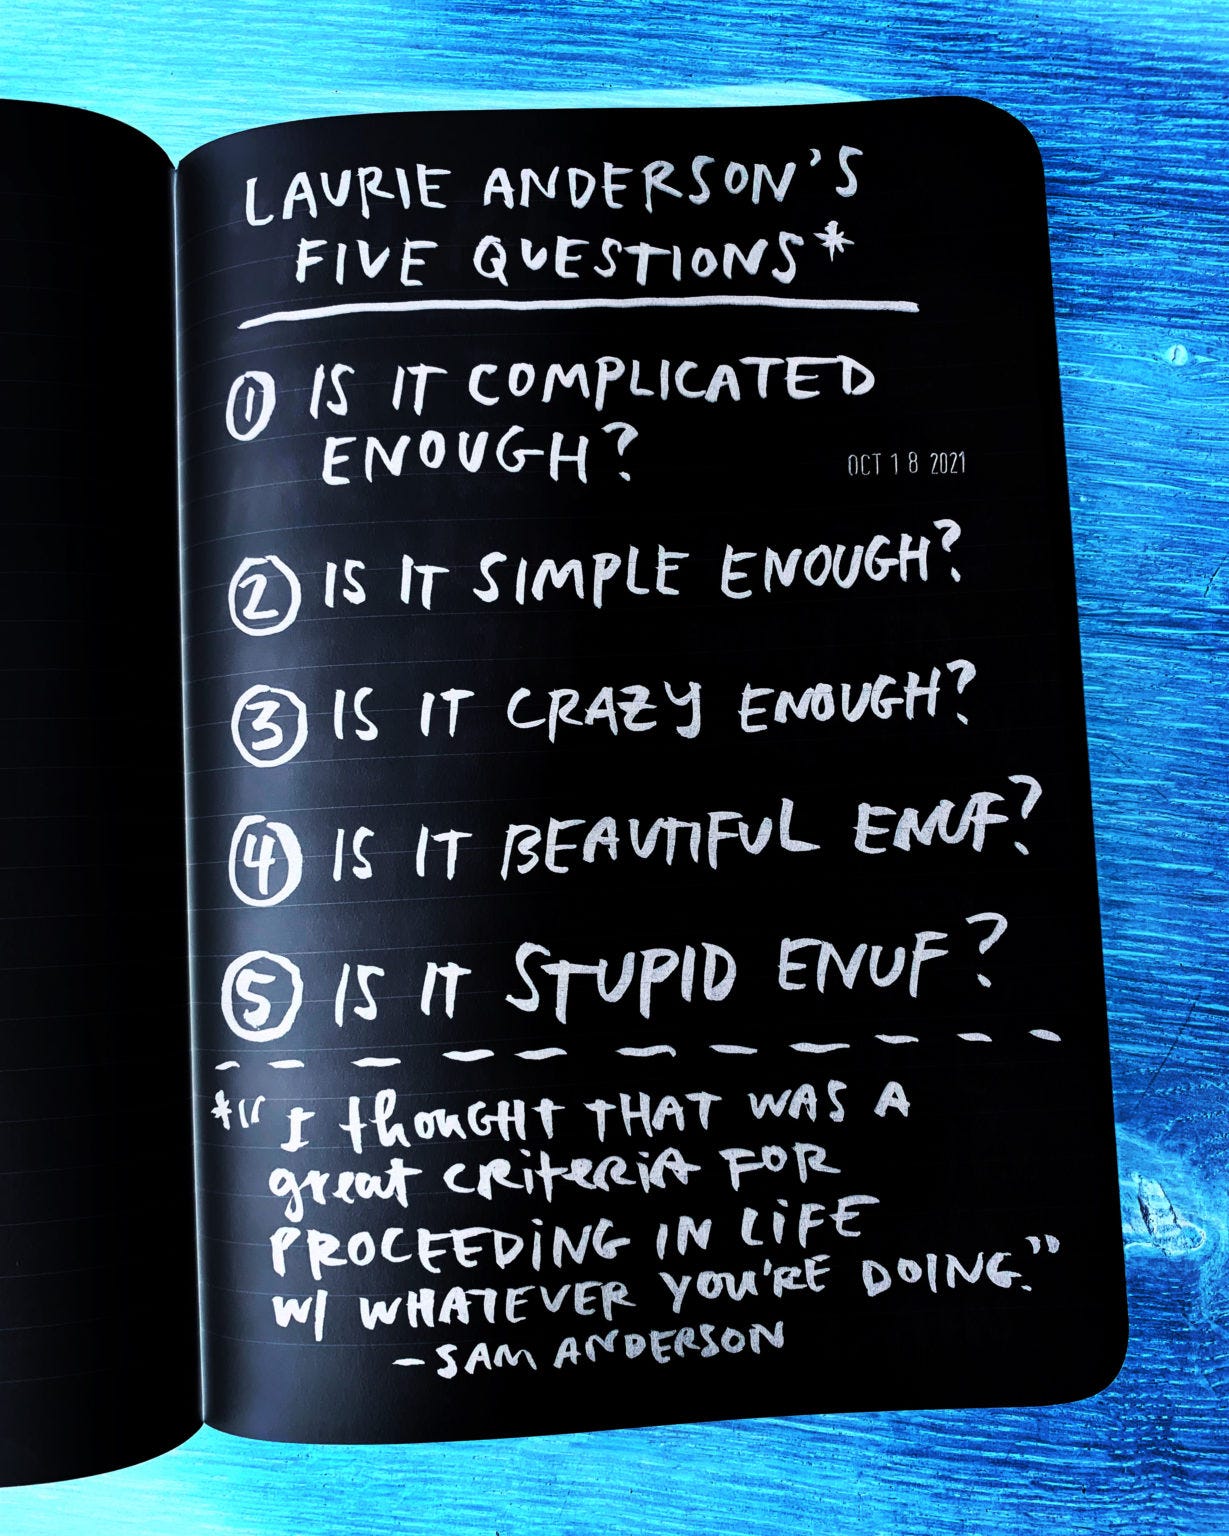 a list of Laurie Anderson’s five questions